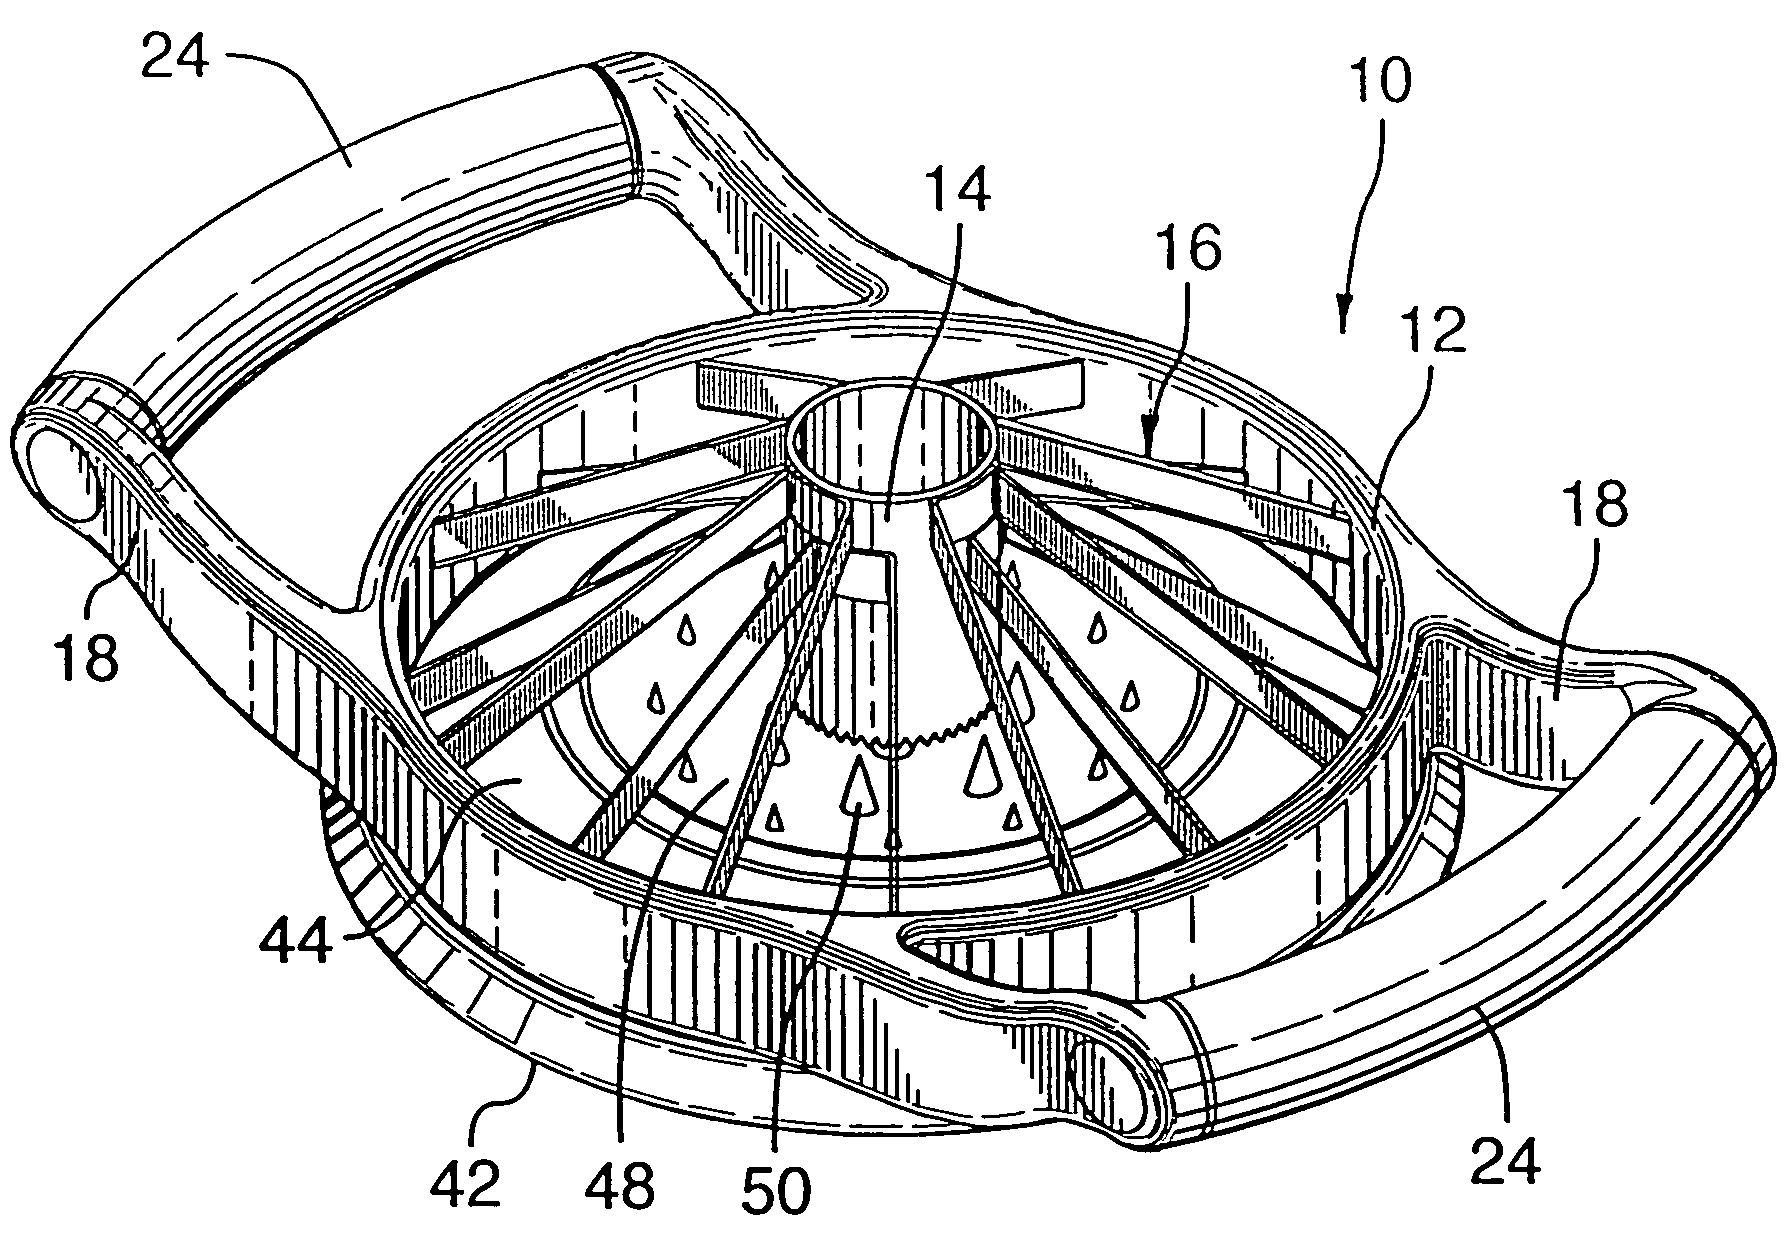 Apparatus for coring into and cutting food items